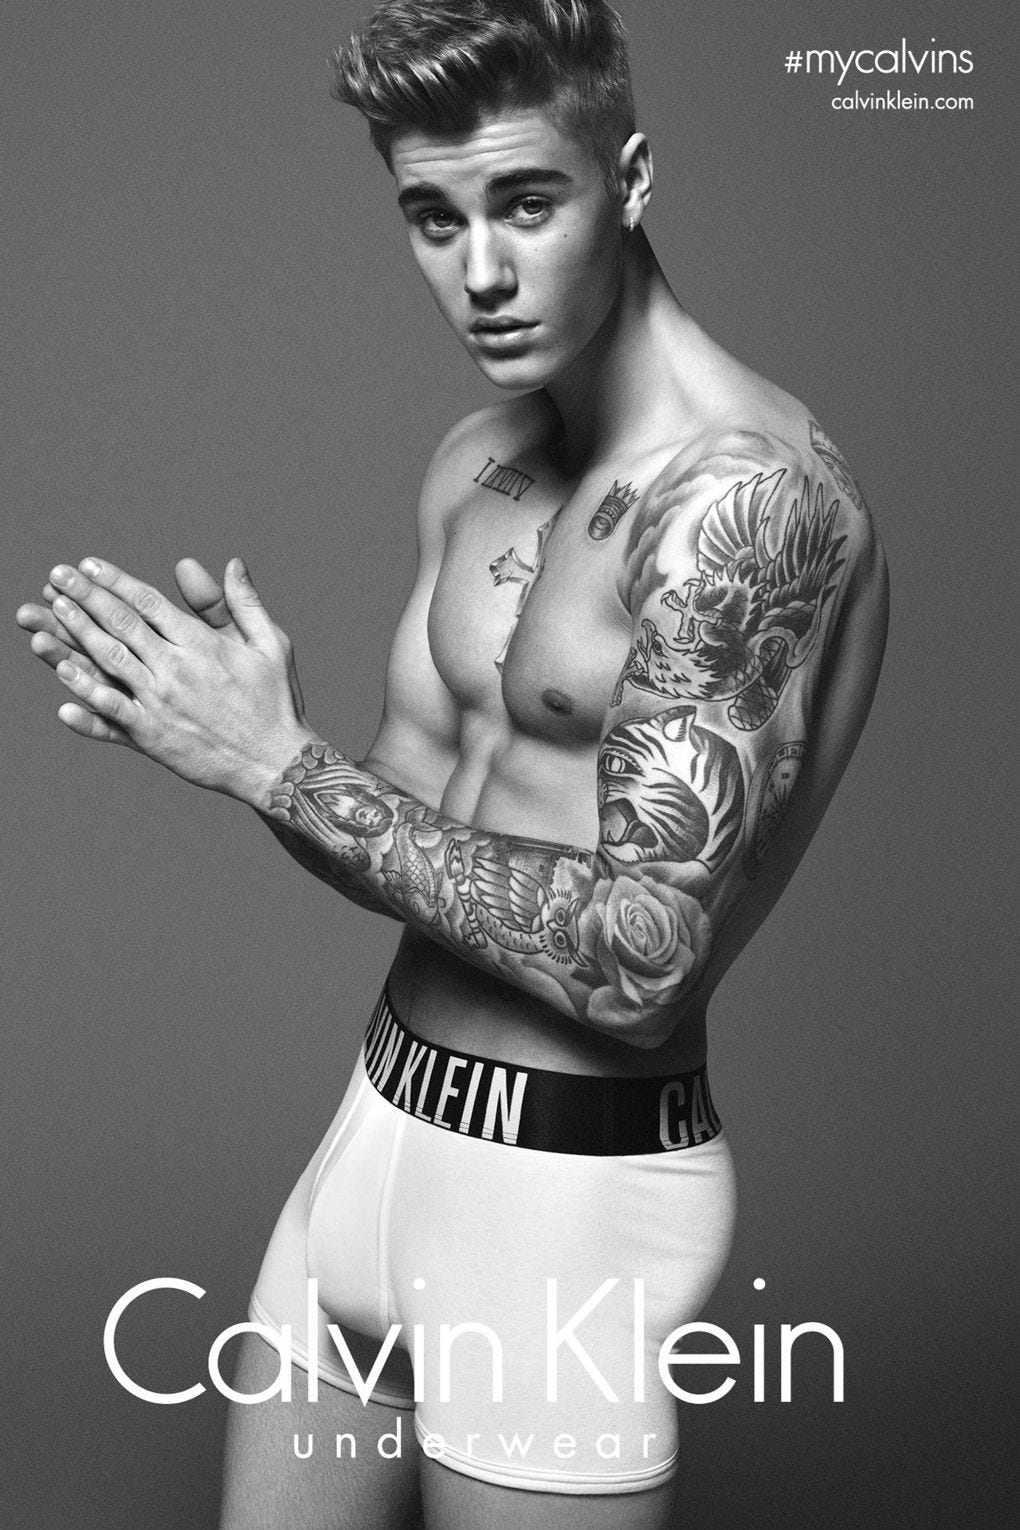 Justin Bieber Rocks Nothing But Wet, White Undies After Taking a